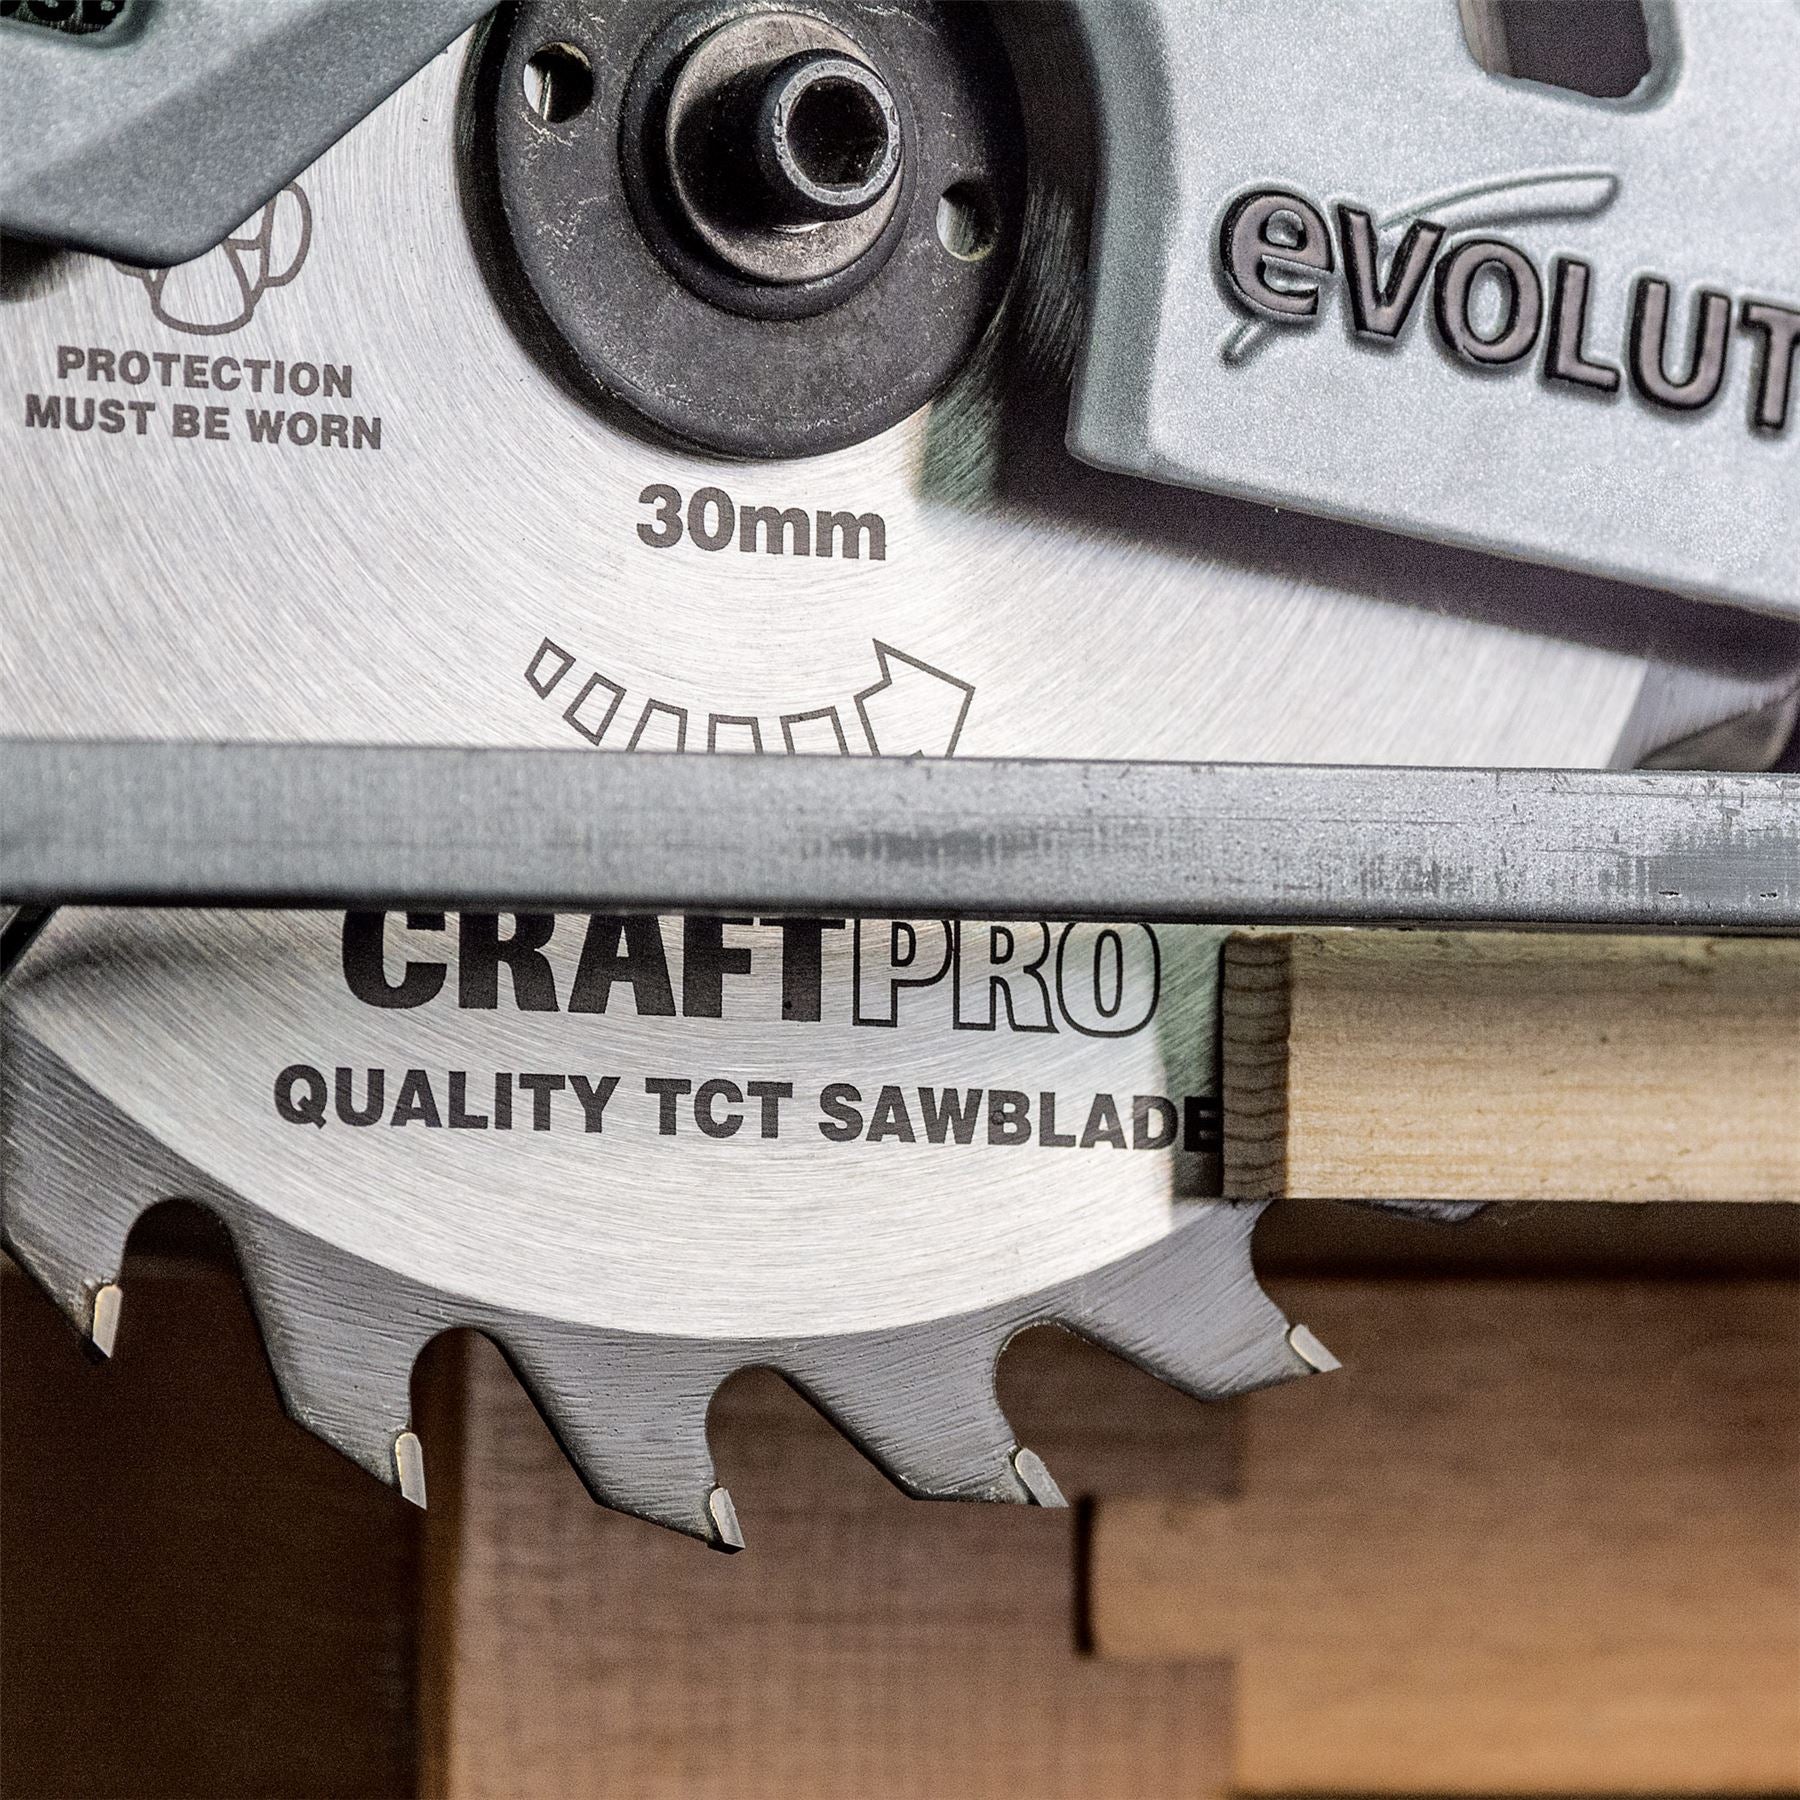 Trend The Craft Pro 190mm Diameter 30mm Bore 40 Tooth General Purpose Saw Blade For Hand Held Circular Saws. CSB/19040